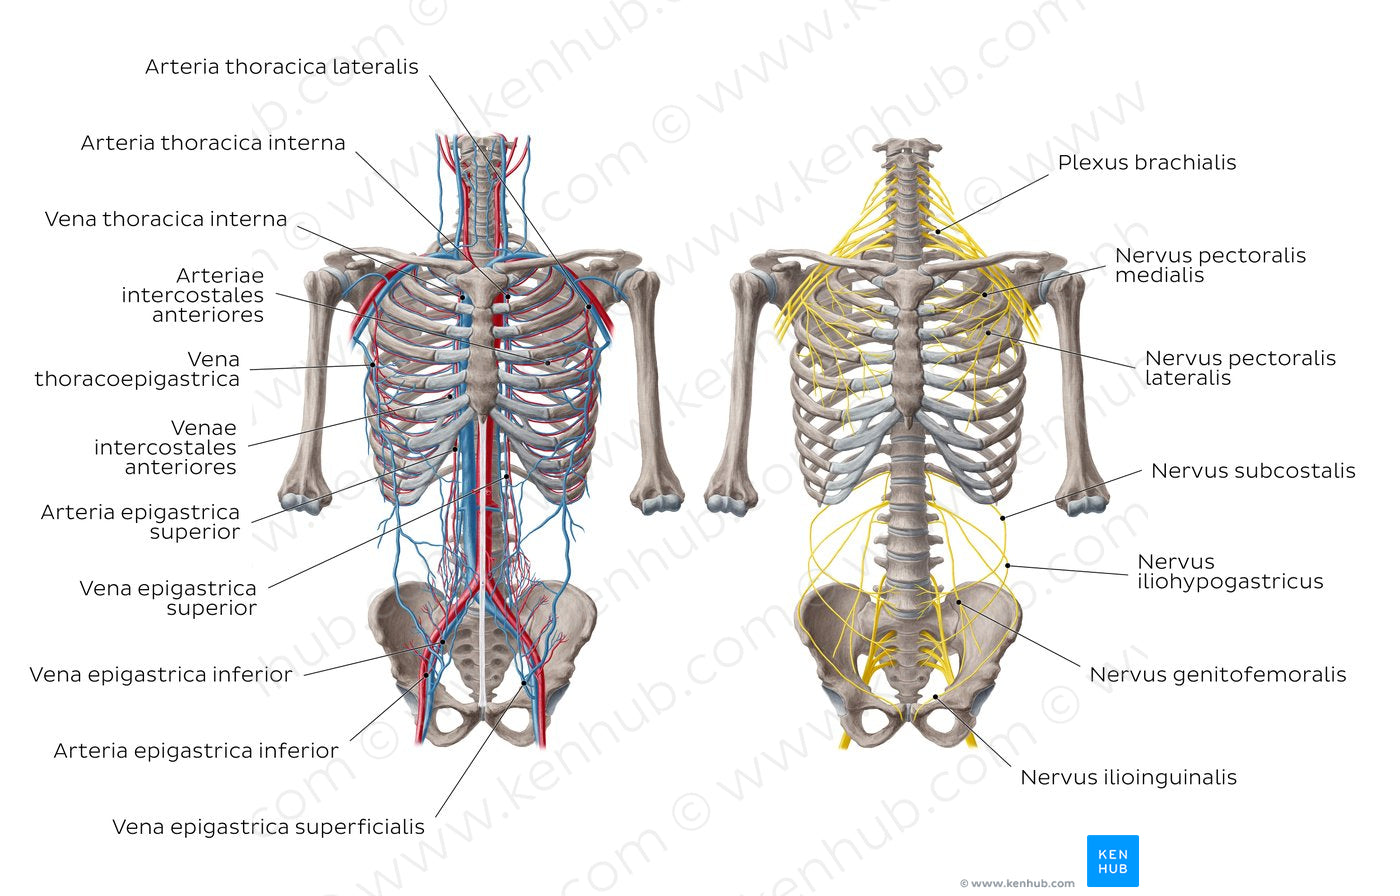 Nerves and vessels of the anterior thoracic wall (Latin)